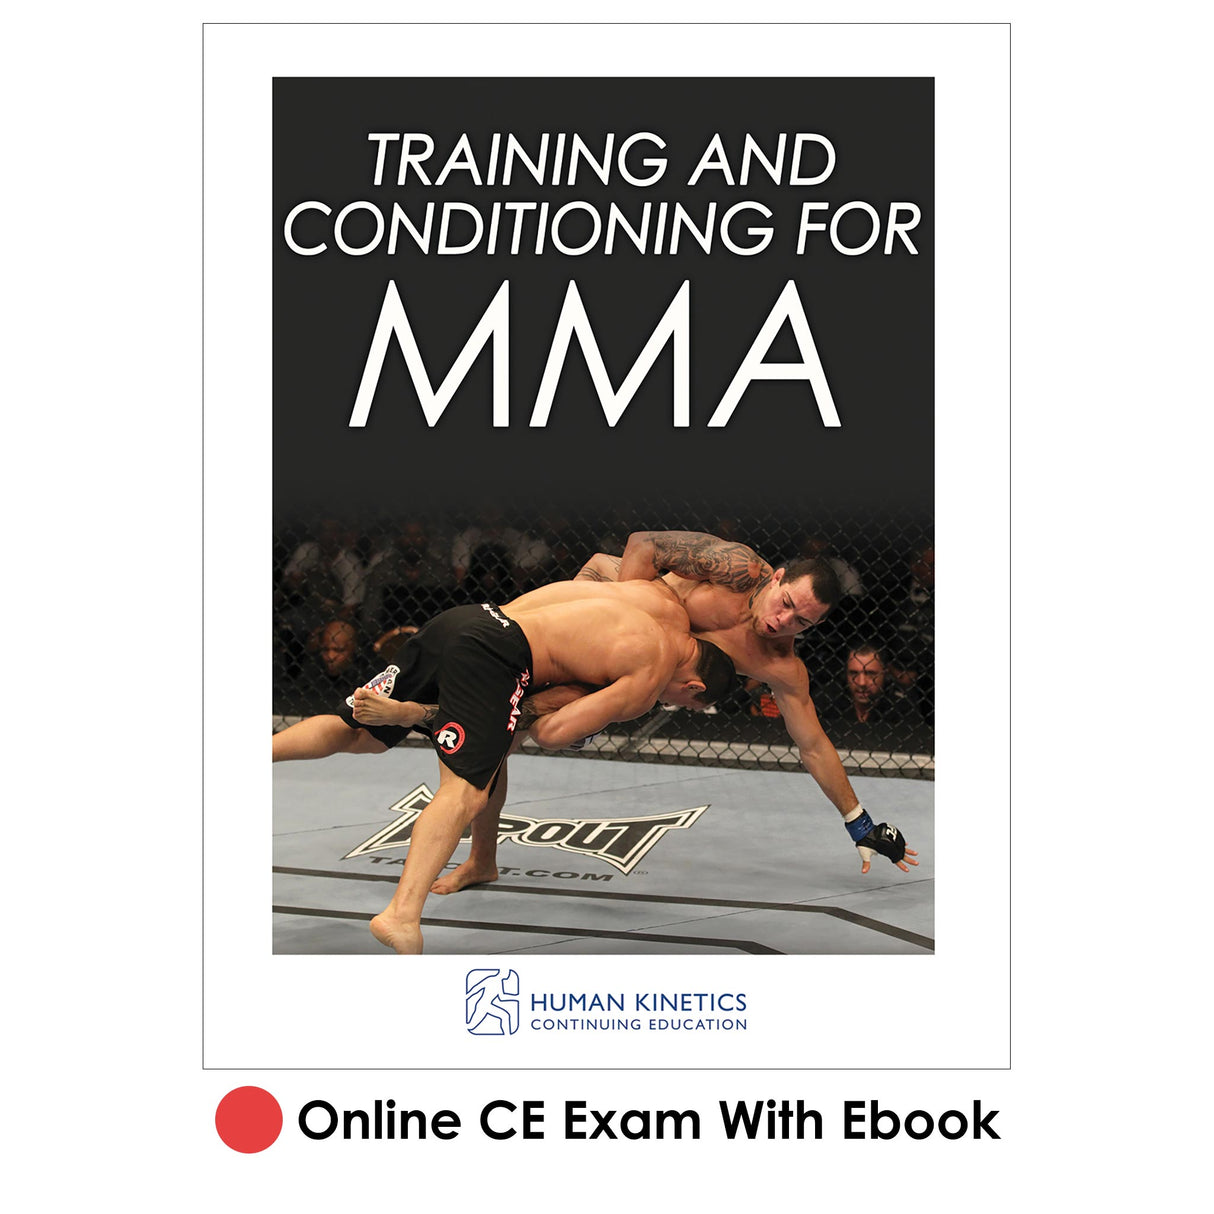 Training and Conditioning for MMA Online CE Exam With Ebook